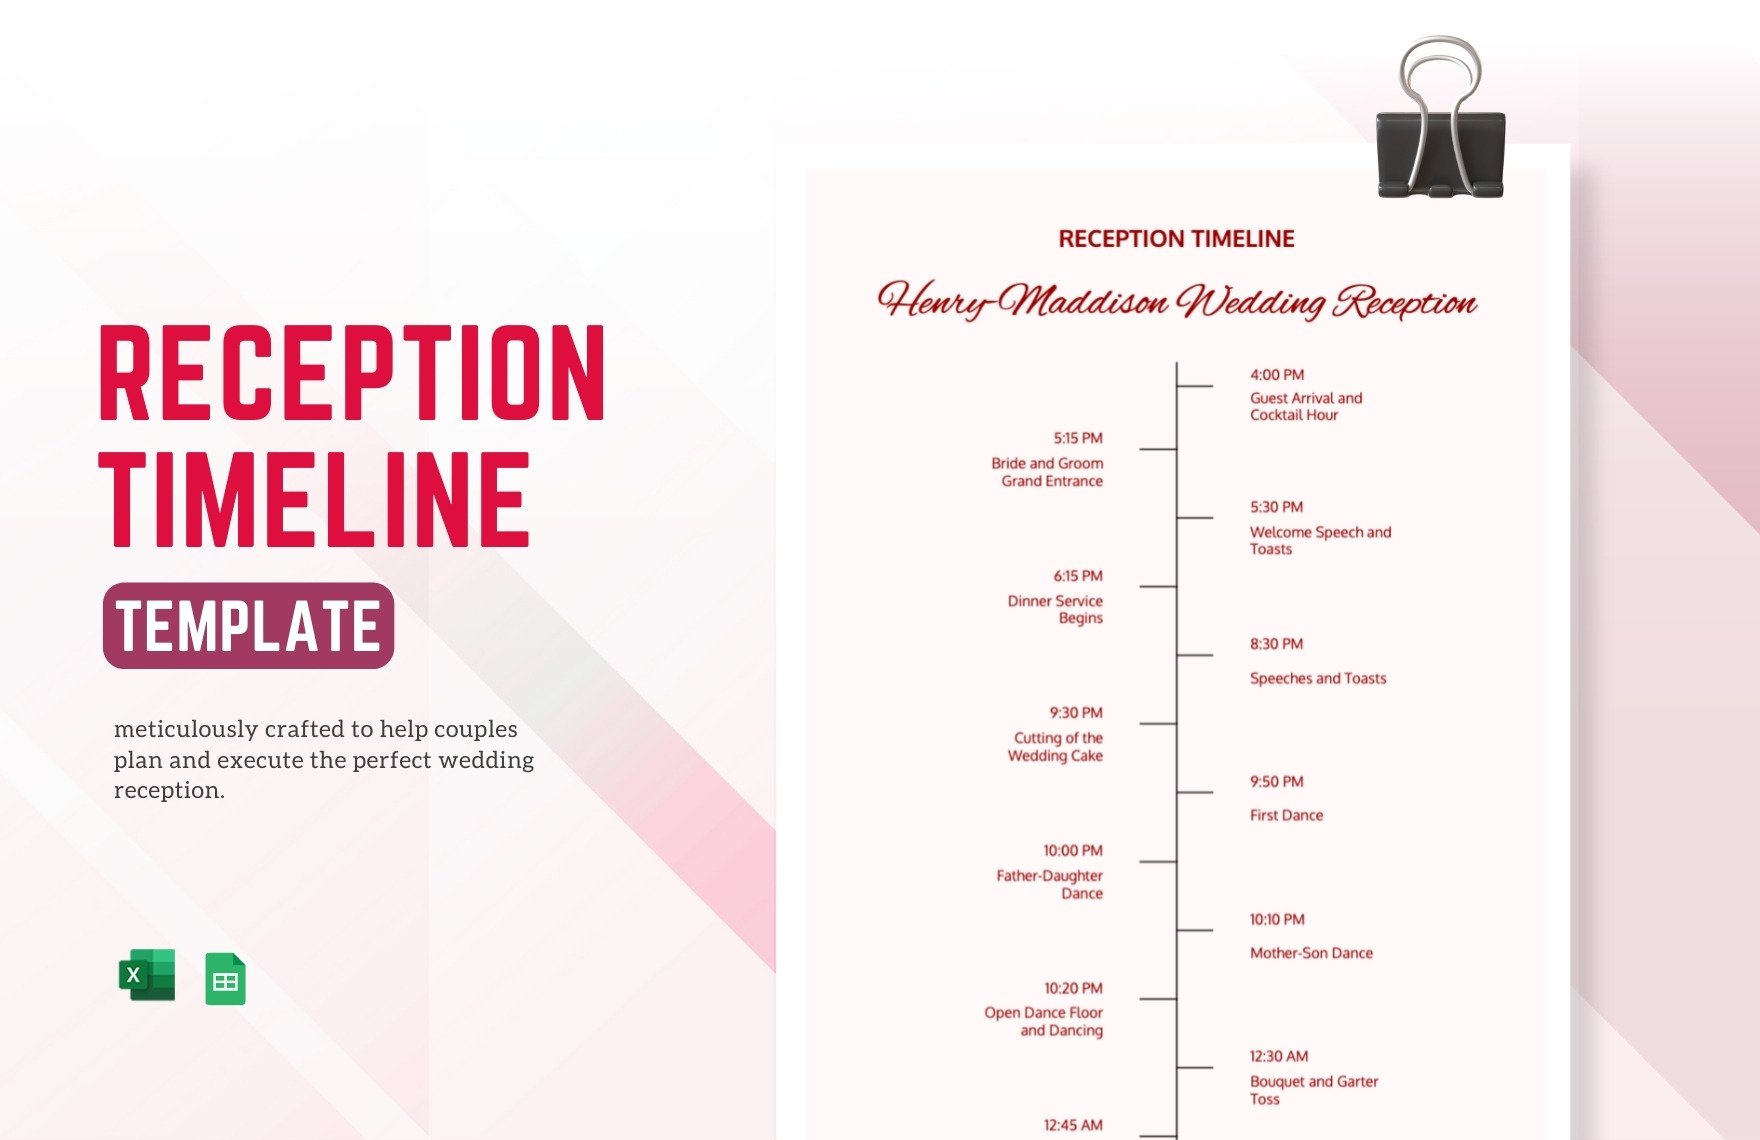 Reception Timeline Template in Excel, Google Sheets